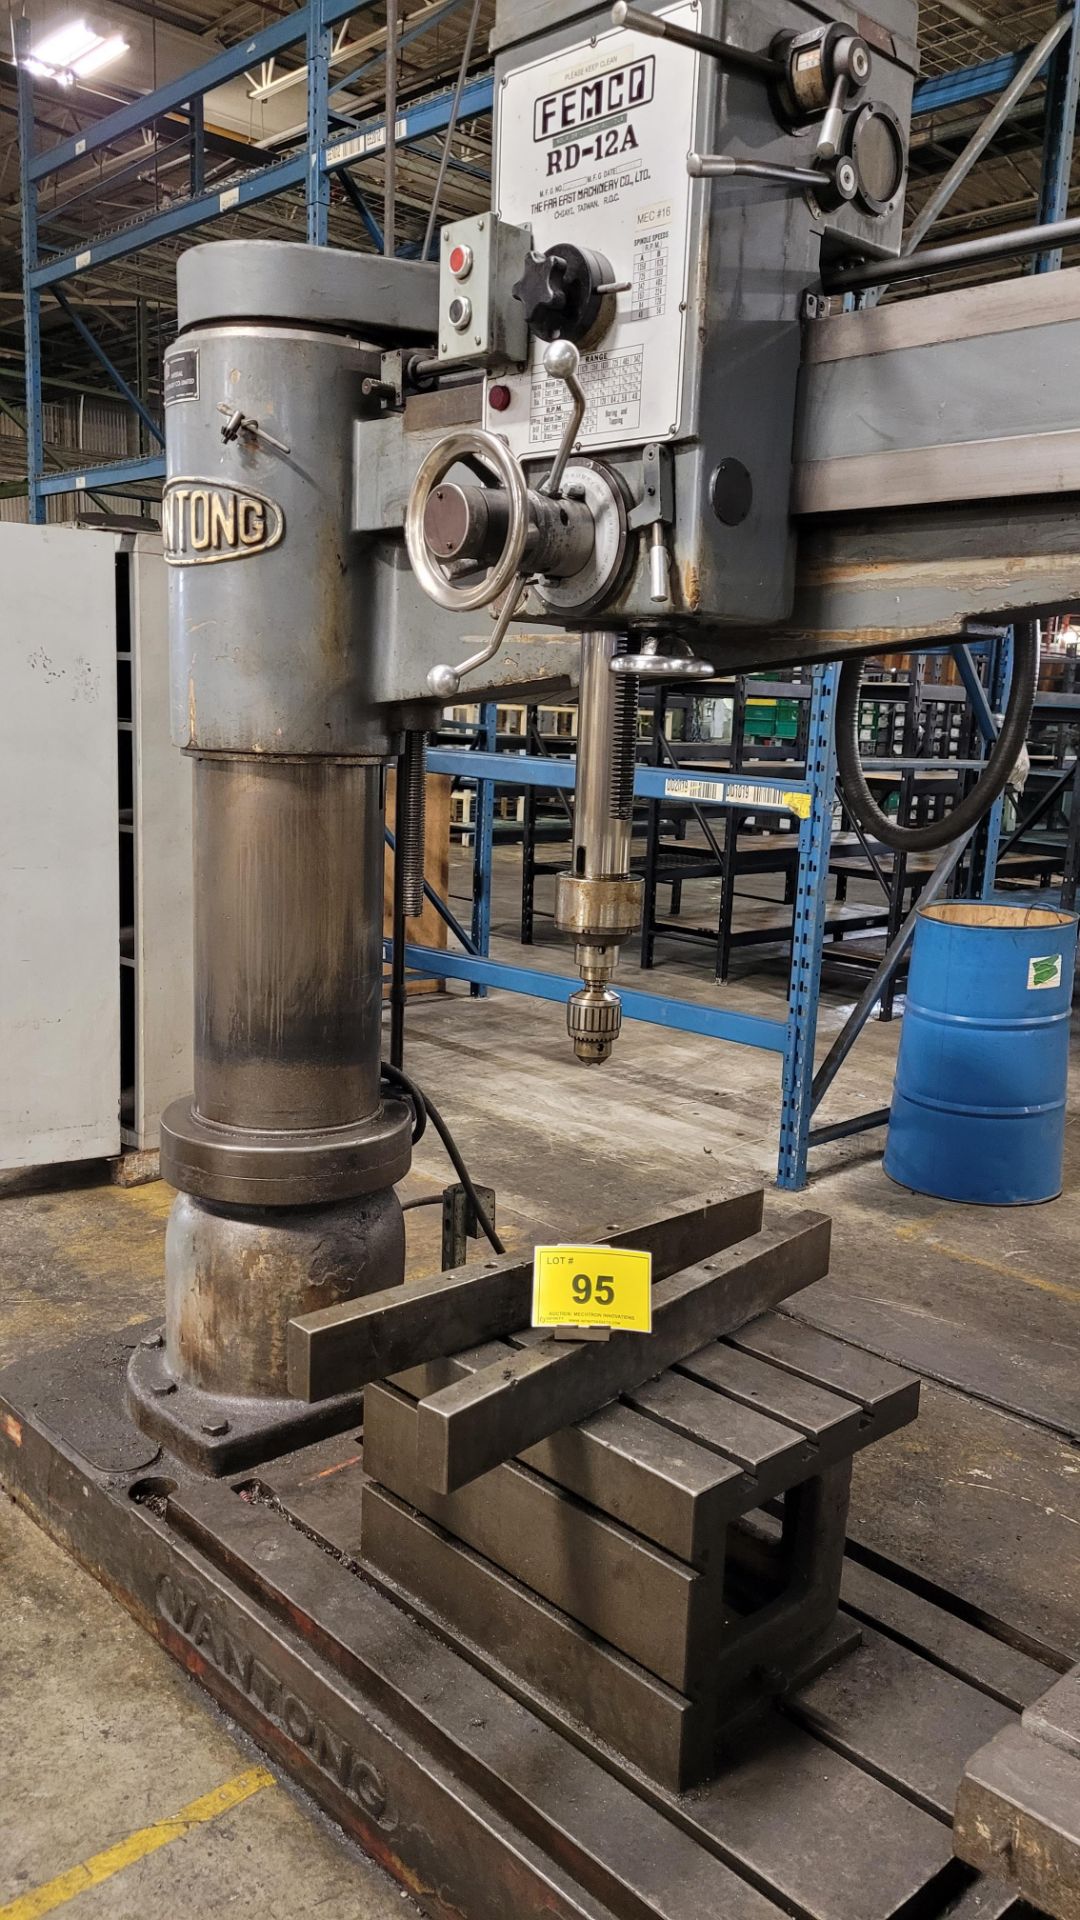 FEMCO / WANTONG RD-12A RADIAL ARM DRILL, BOX TABLE, SET OF PARALLELS, S/N 75-2137 (RIGGING FEE $